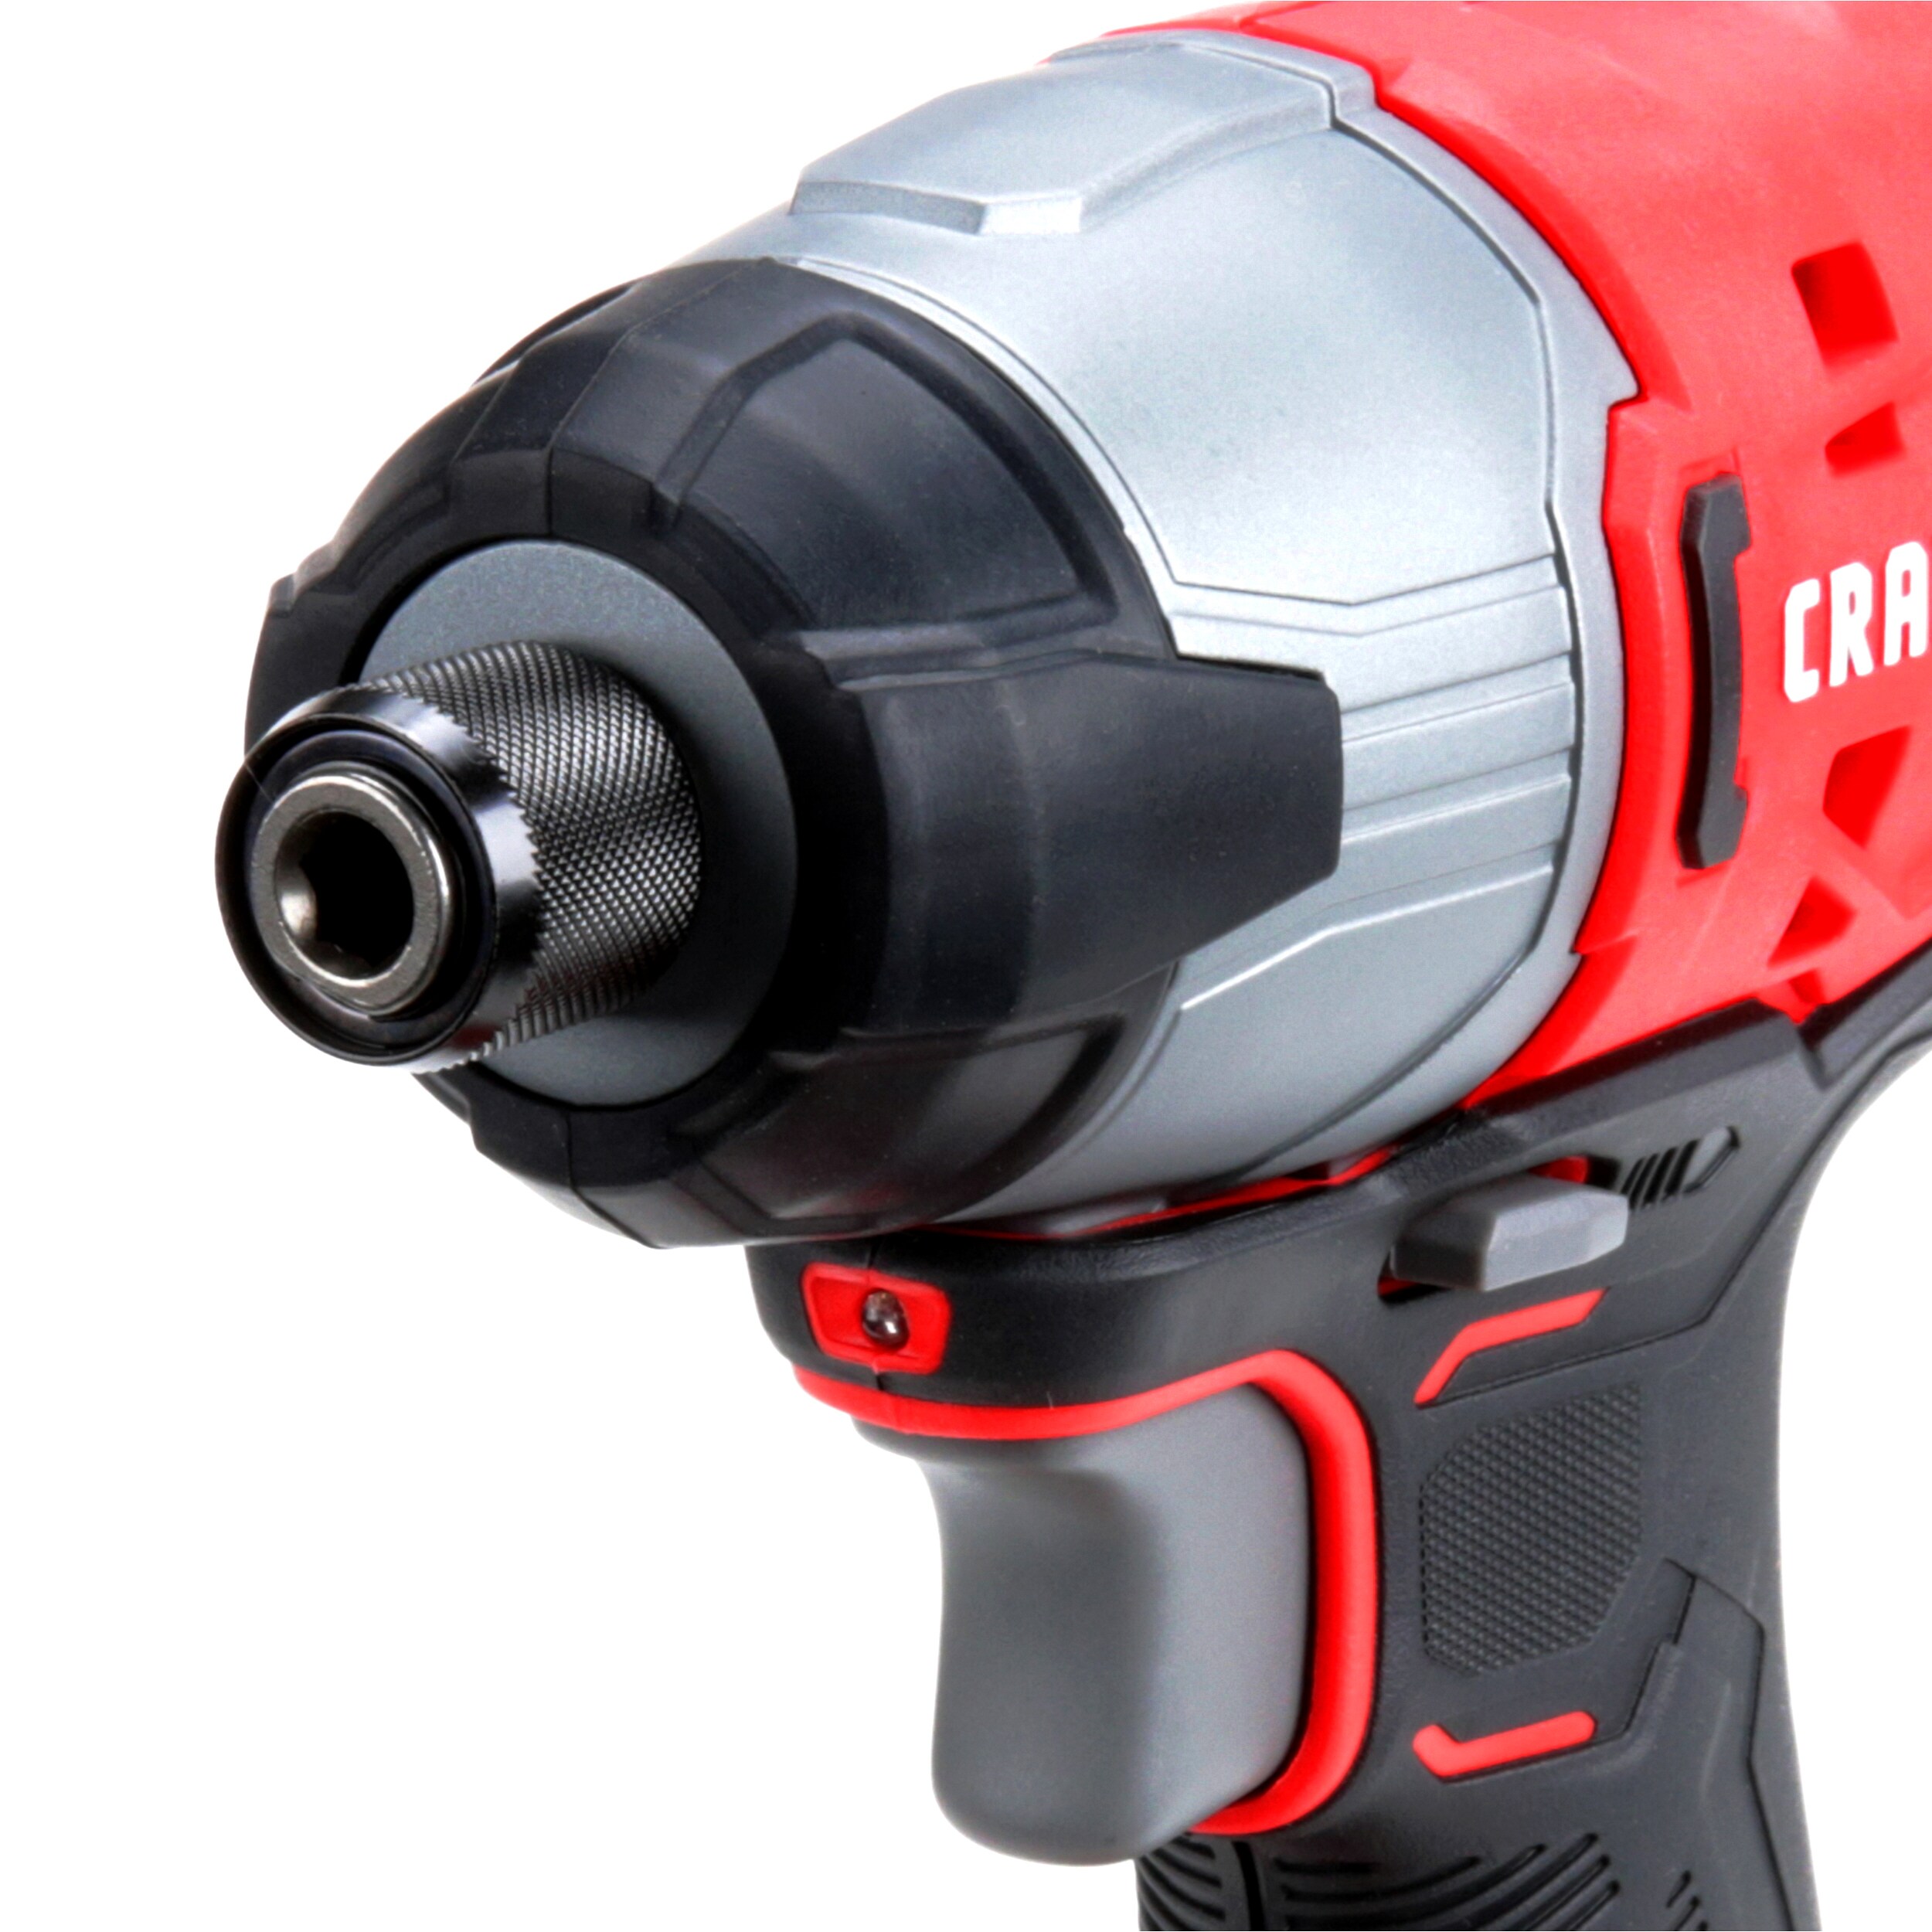 CRAFTSMAN V20 20-volt Max Variable Speed Cordless Impact Driver (2-Batteries Included)